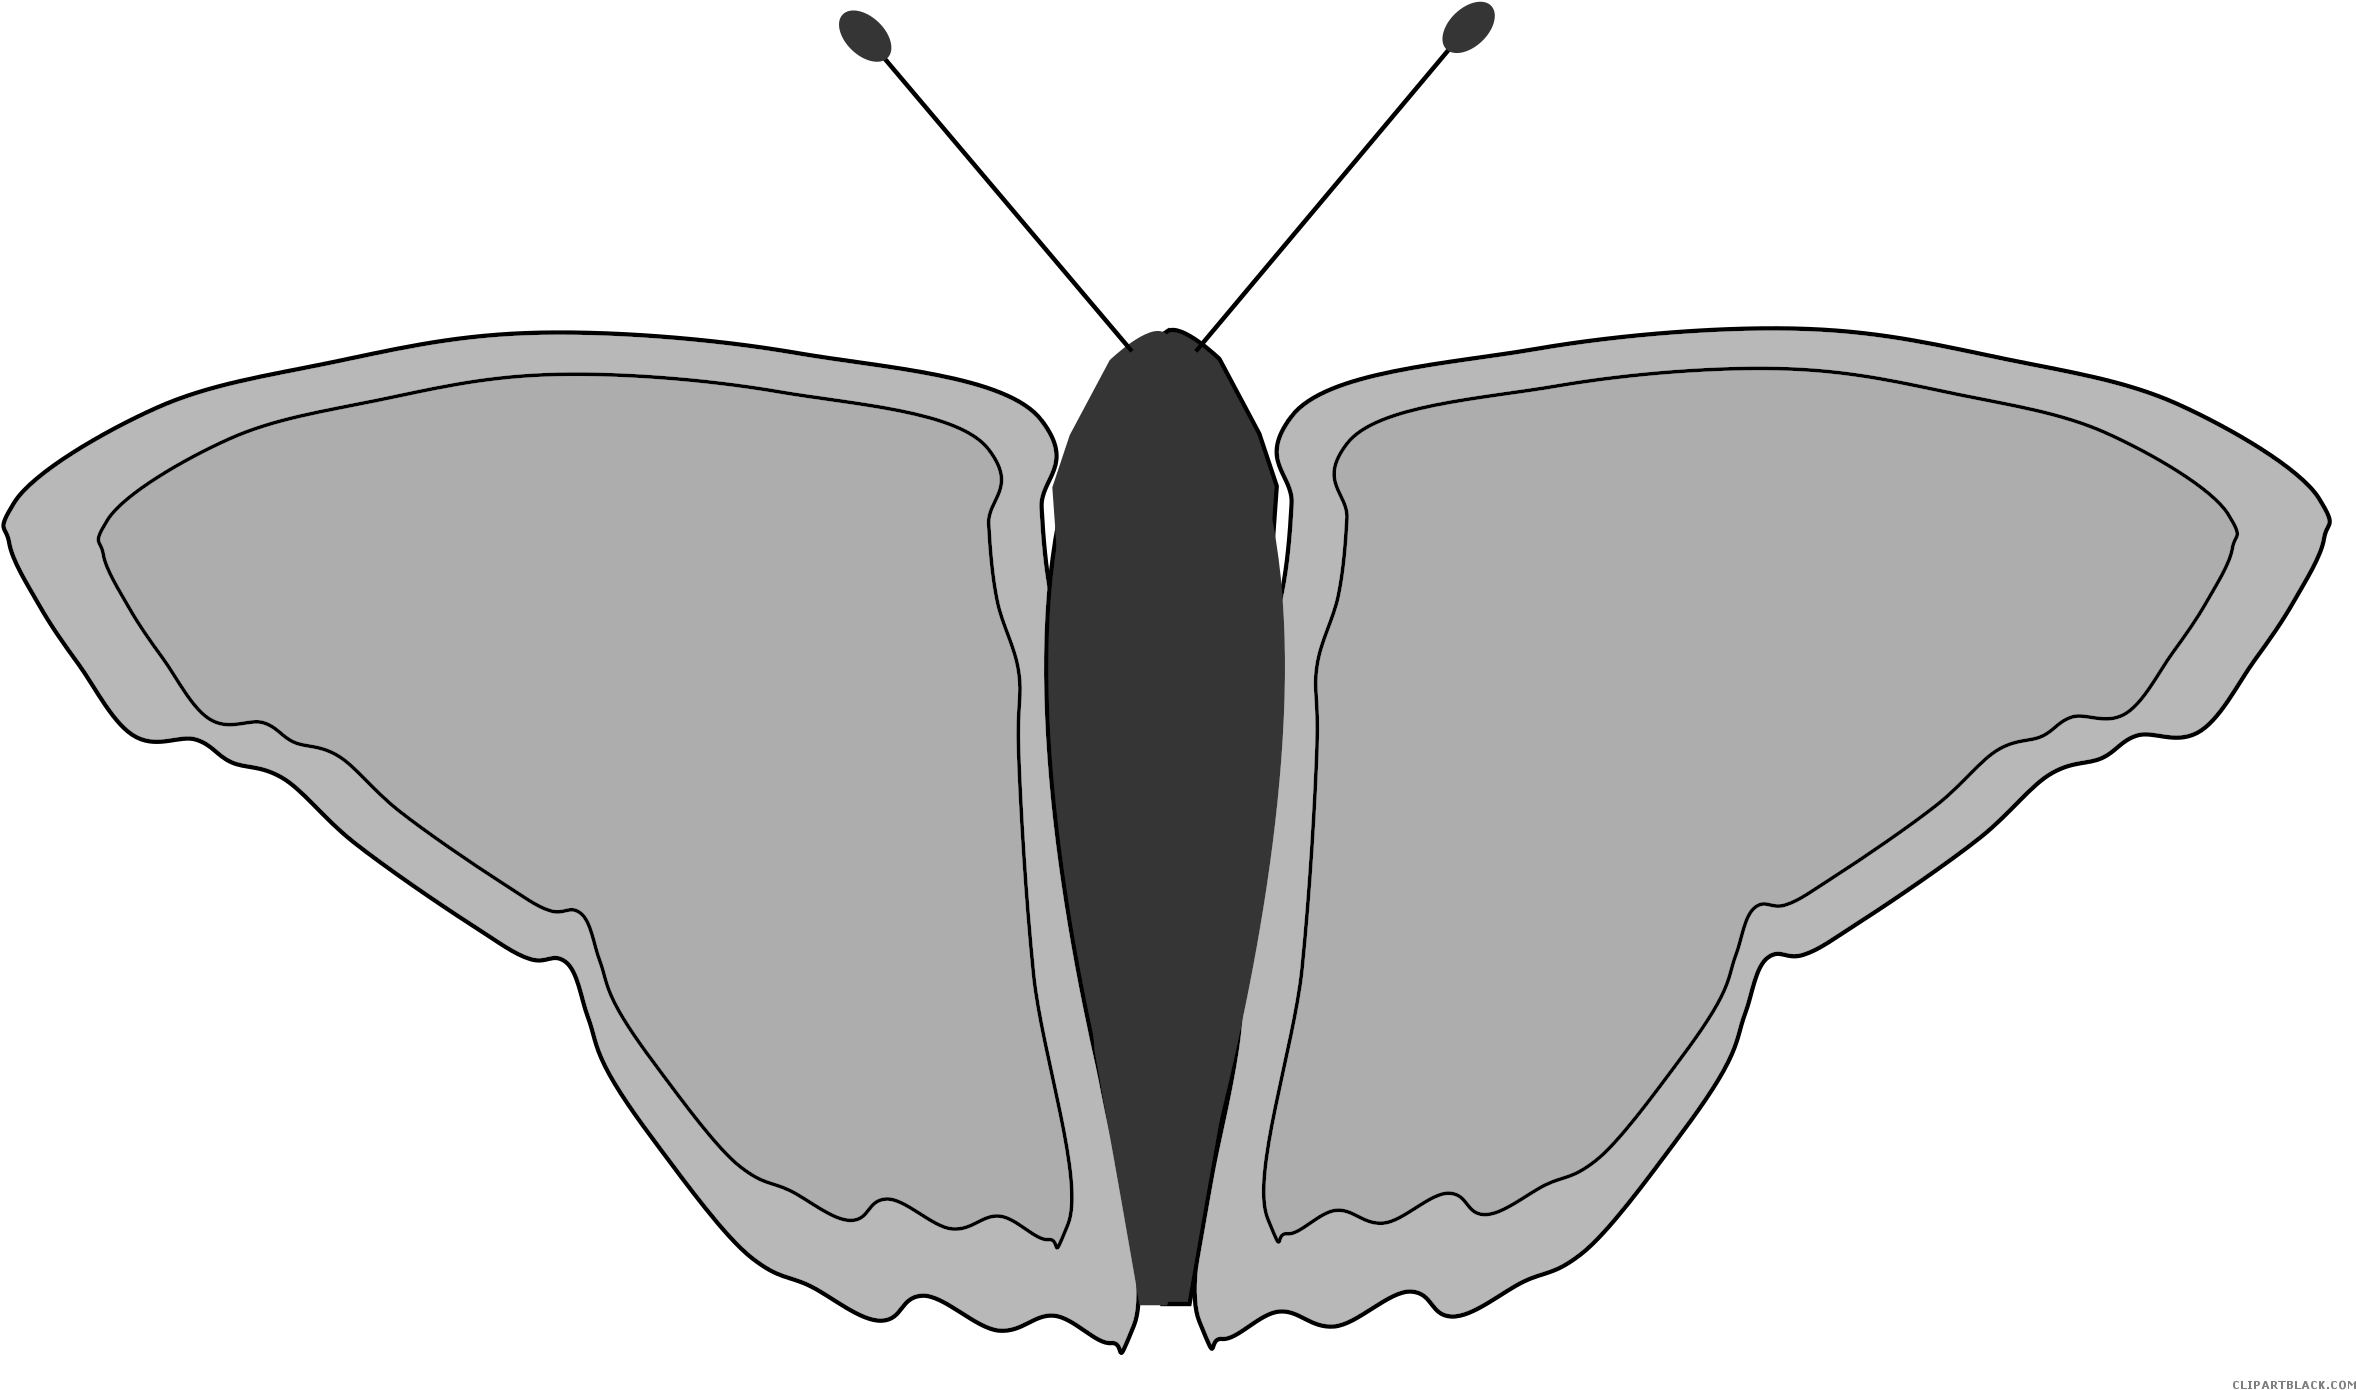 Butterfly Animal Free Black White Clipart Images Clipartblack - Portable Network Graphics (2400x1440)